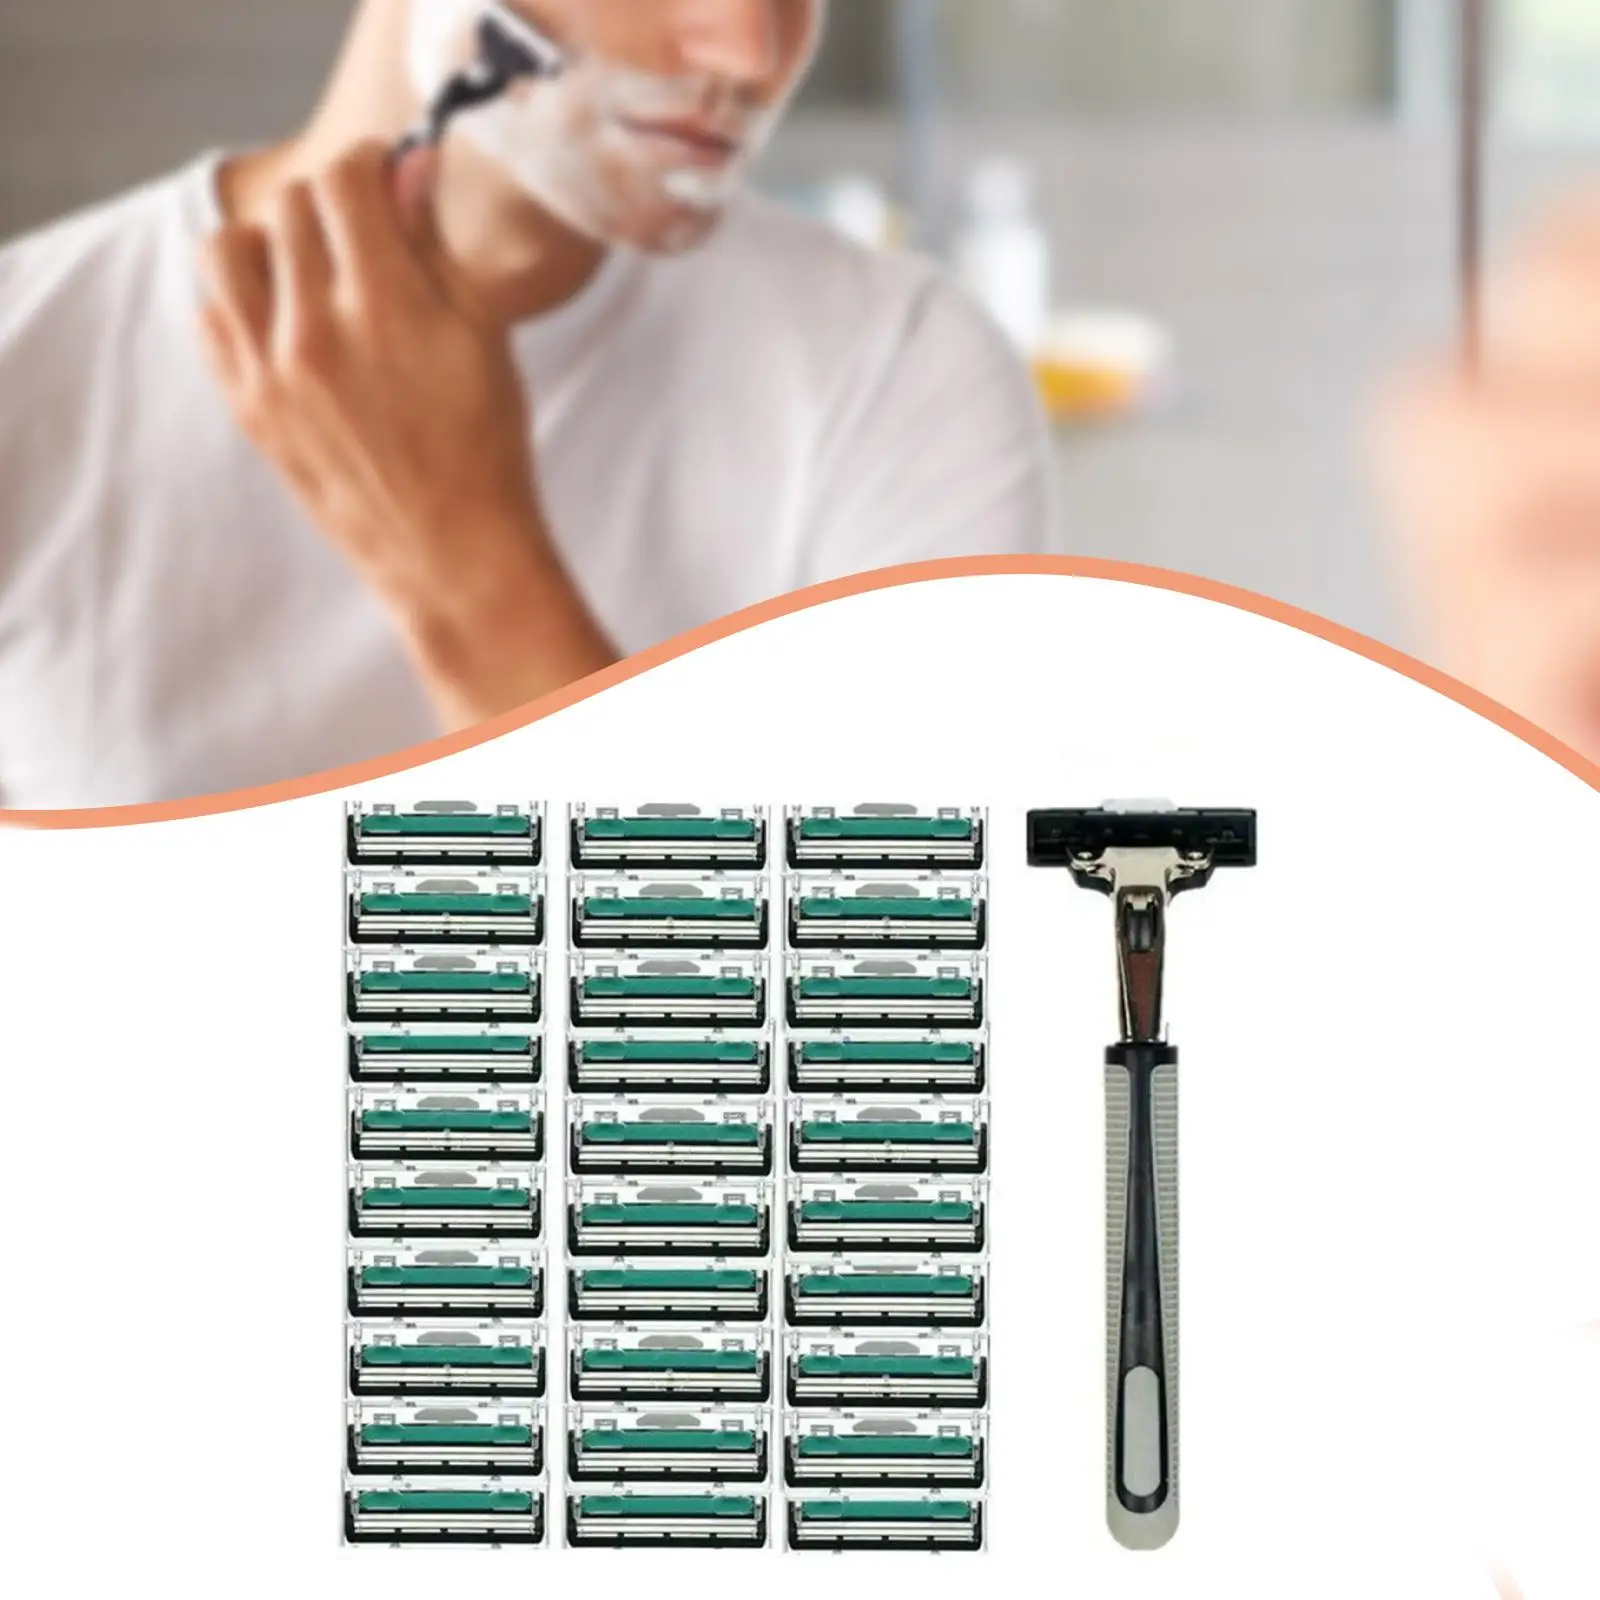 Manual Double Edge Shaver Face Shaver Anti Slip Handle Portable Replaceable Heavy Duty Reusable Stainless Steel for Home Salon